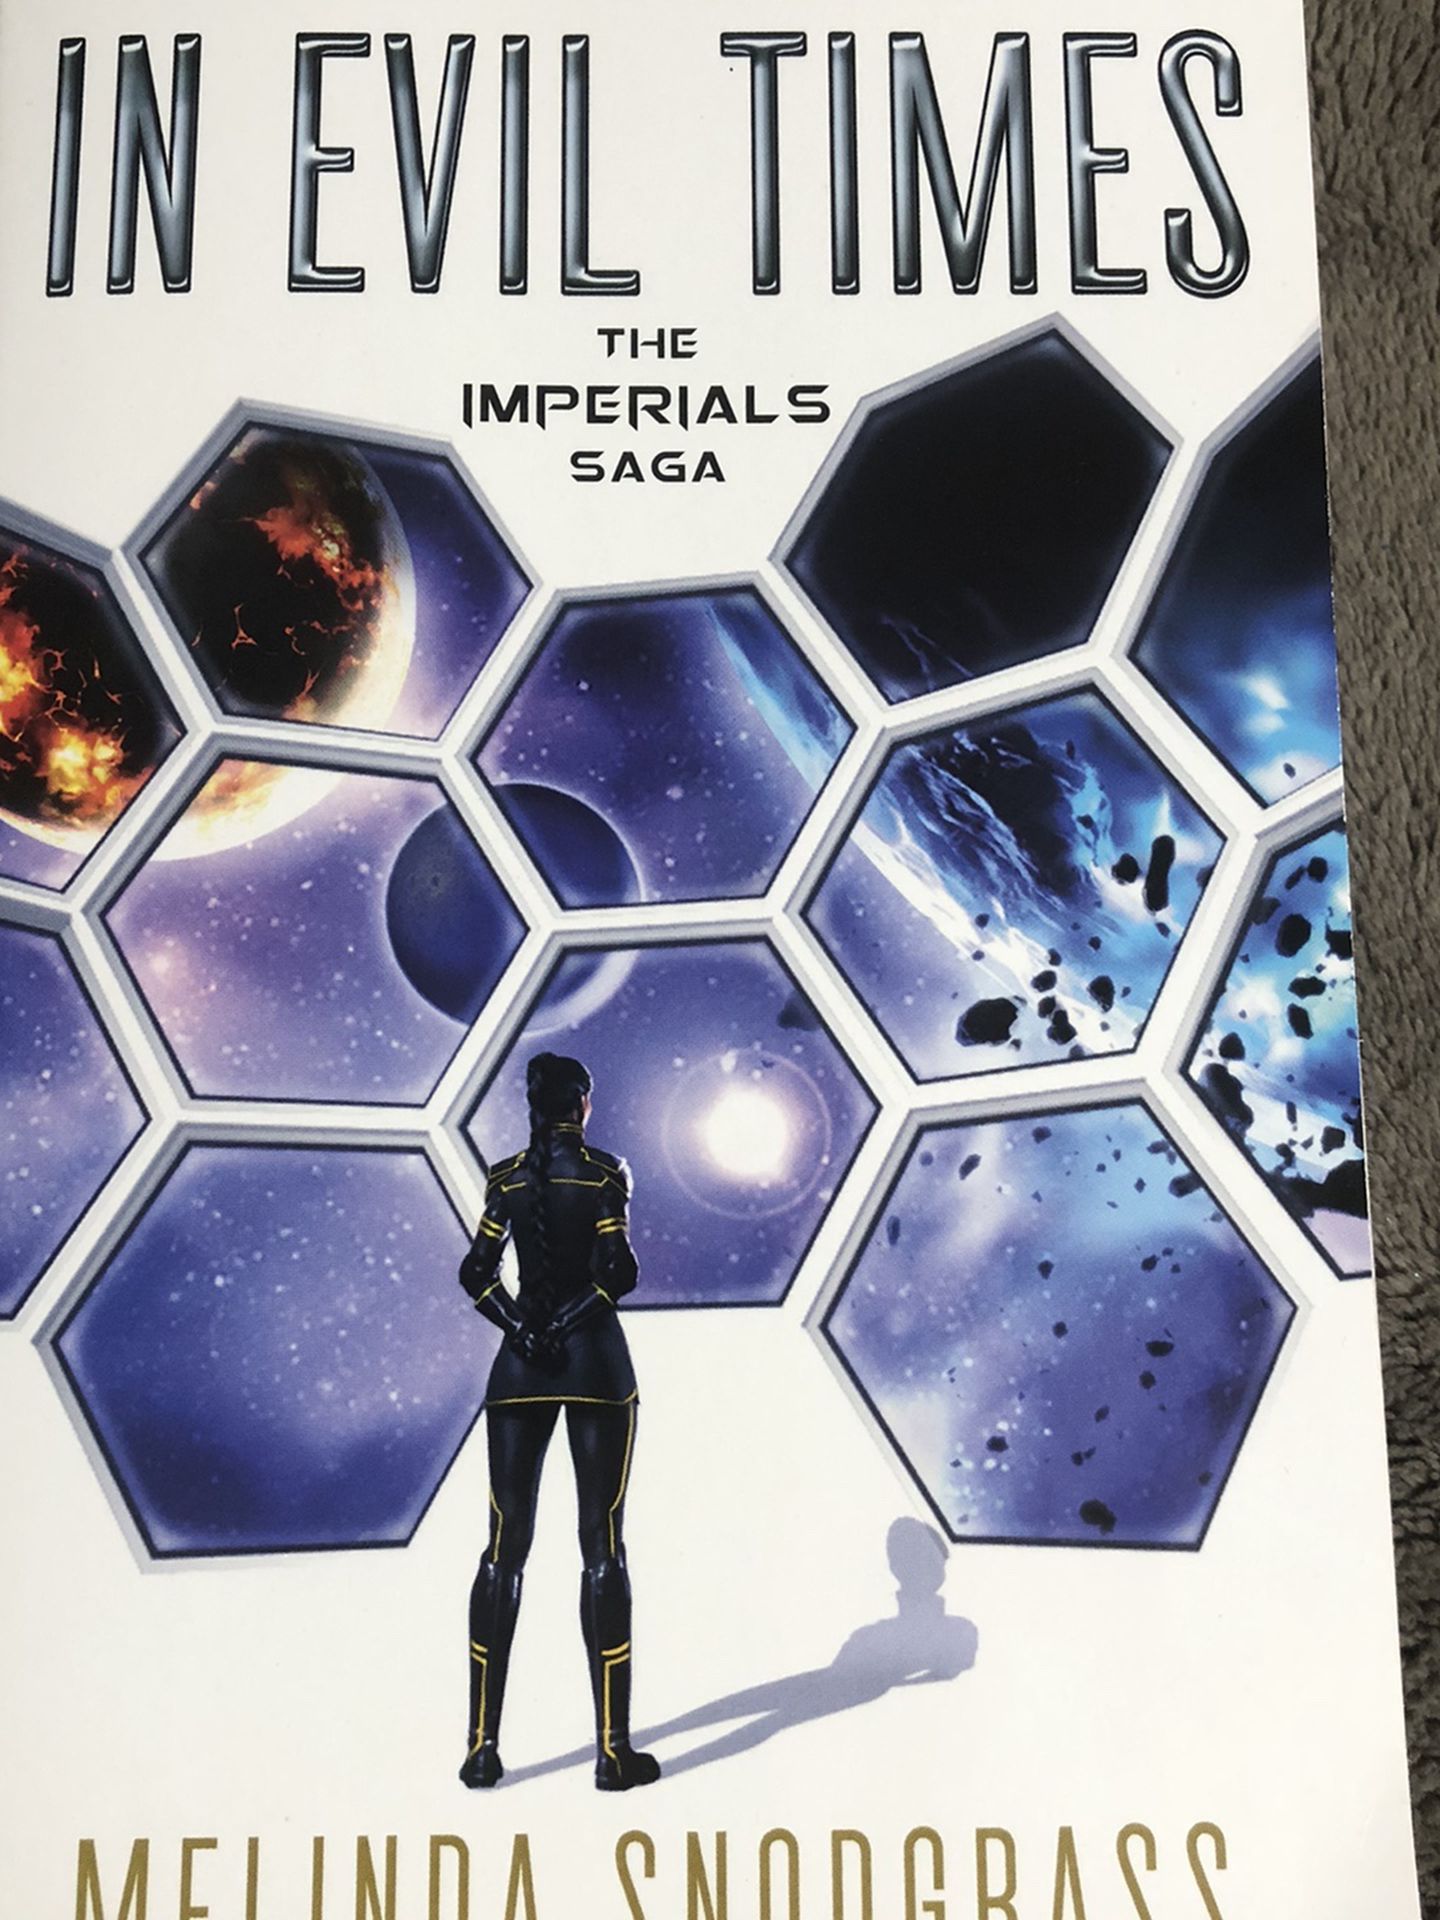 In Evil Times: The Imperials Saga by Melinda Snodgrass